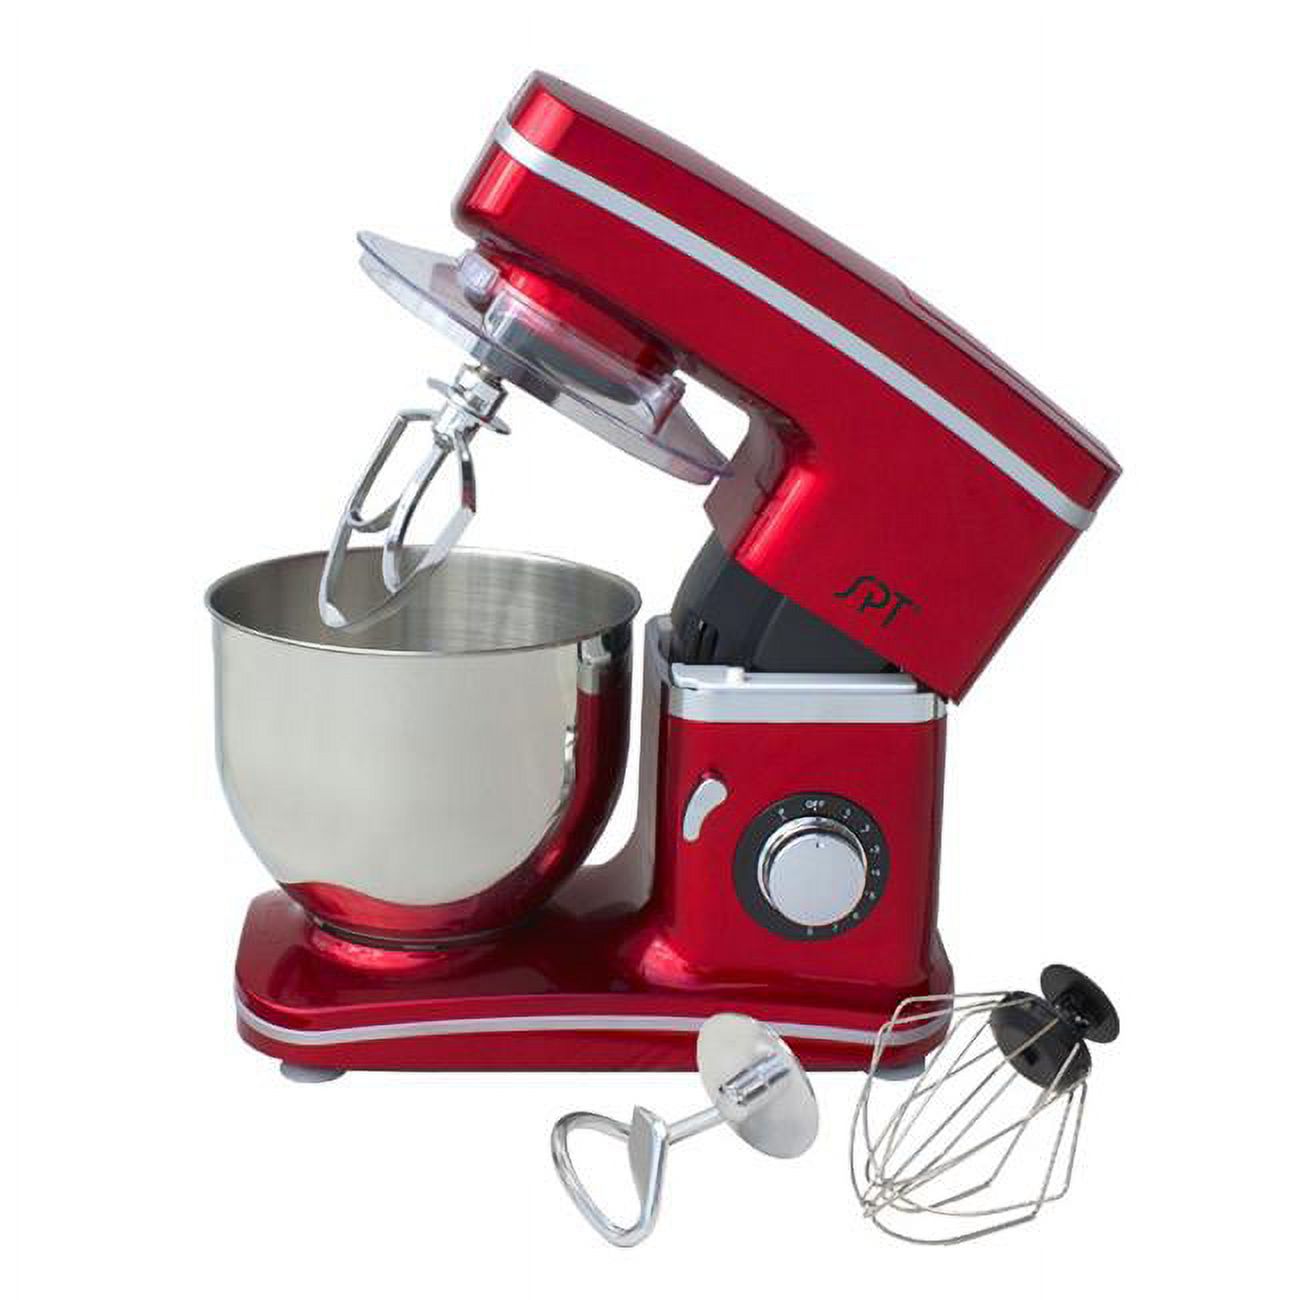 8-Speed Stand Mixer (Red) - image 1 of 5